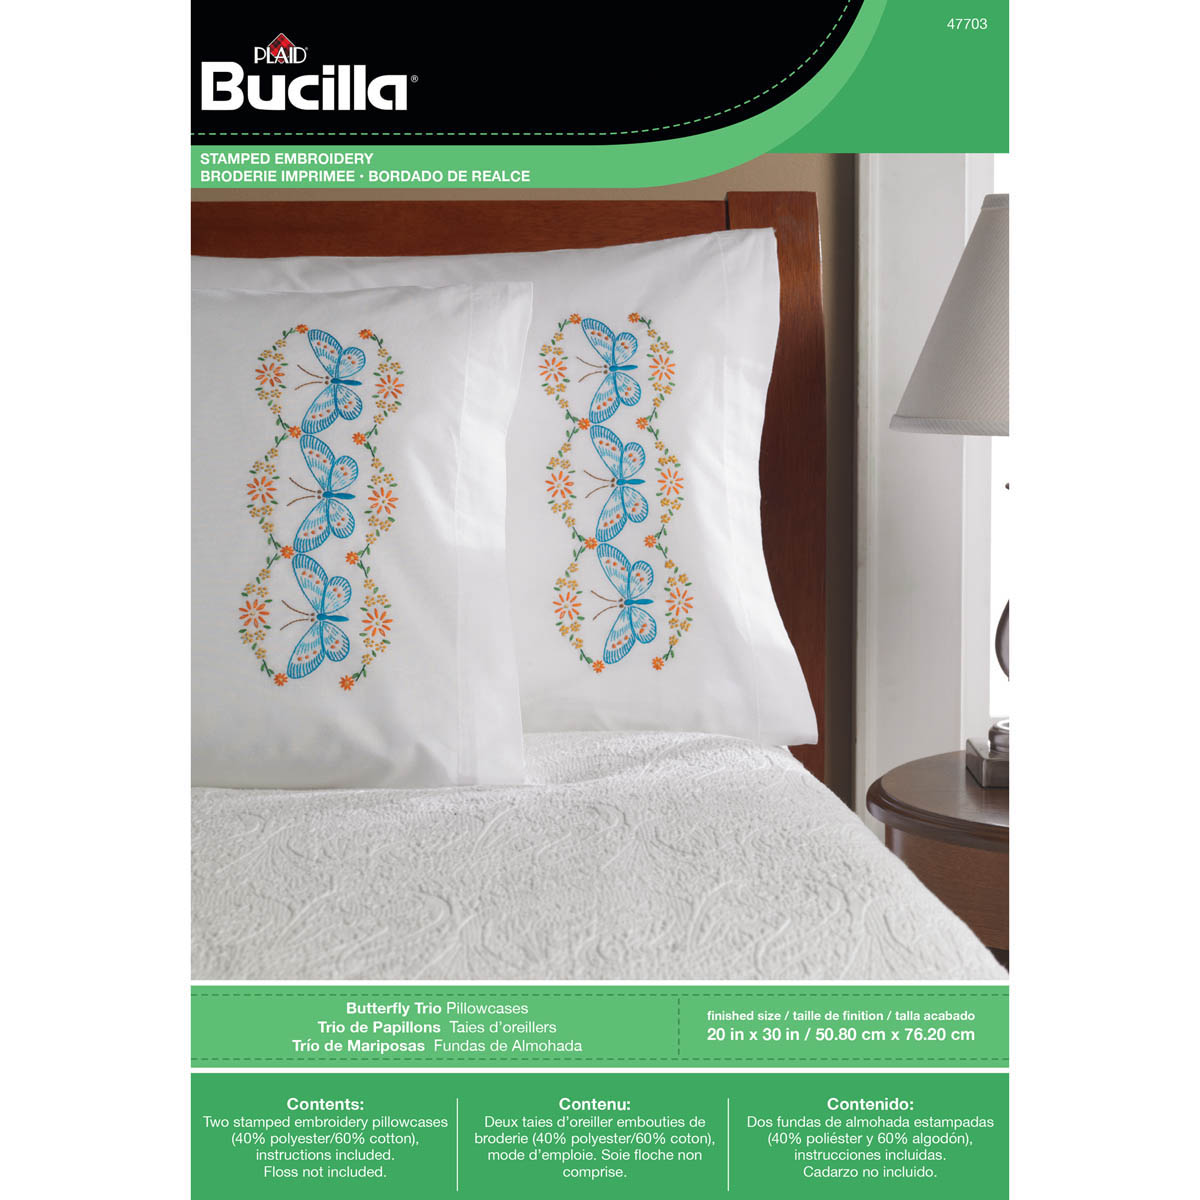 Bucilla ® Stamped Cross Stitch & Embroidery - Pillowcase Pairs - Butterfly Trio - 47703